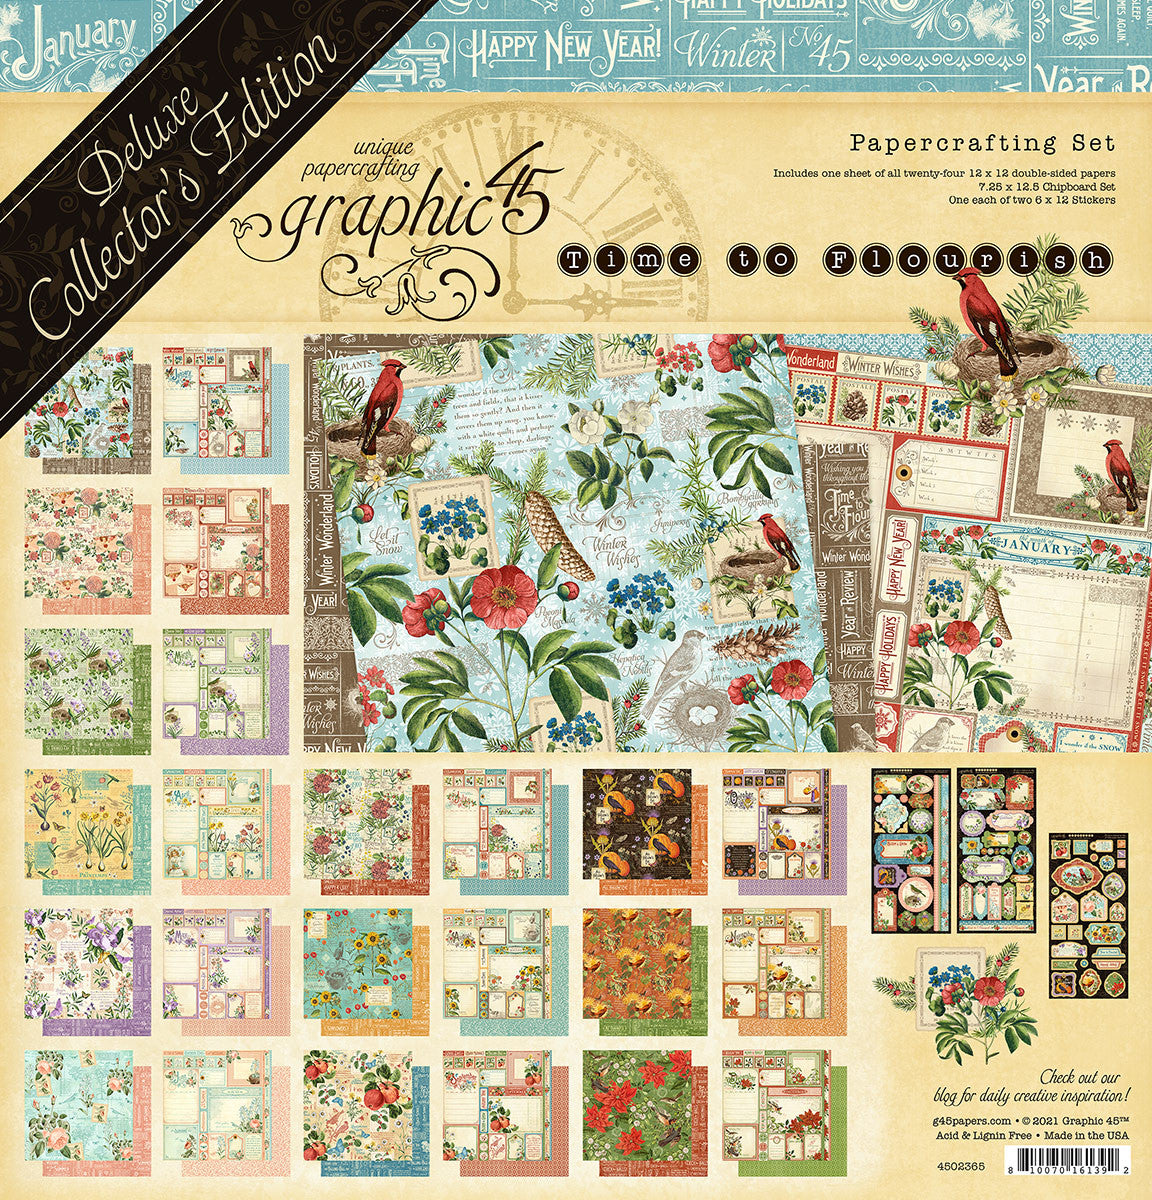 Cards and Scrapbooking Paper, Double Sided Printed, Graphic 45 